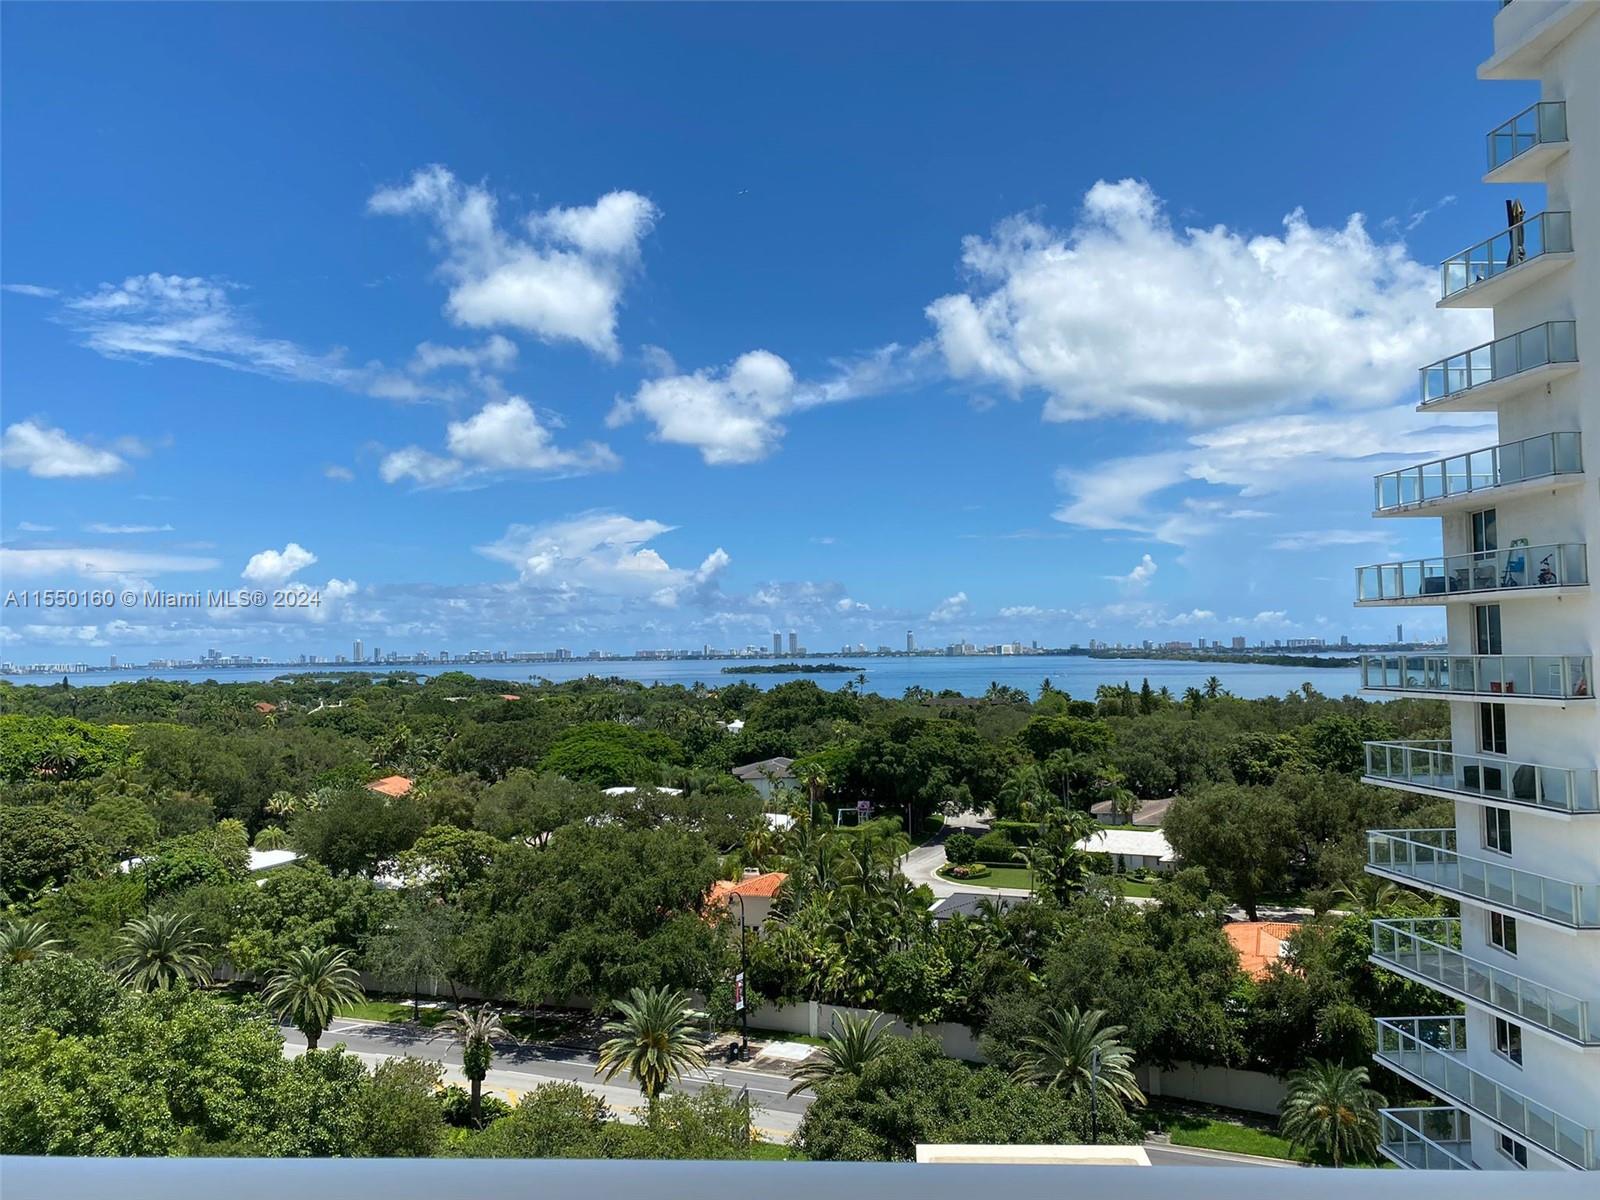 Beautiful Furnished 1 Bed plus Den + 1 bath, corner Unit, breathtaking views of Biscayne Bay & Bay Point. Luxury Condominium located 5 min from the Design District & Midtown; Baltus is a boutique building w/only 167 residences in 17 floors, Full amenities:World-class gym,55 foot long pool overlooking Biscayne Bay & Miami Beach,Hot Tube,Club House, Solarium on the roof top lounge & much more. 24 hours security,Walking distance to luxury shops & award winning restaurants, museums & galleries. Pet friendly